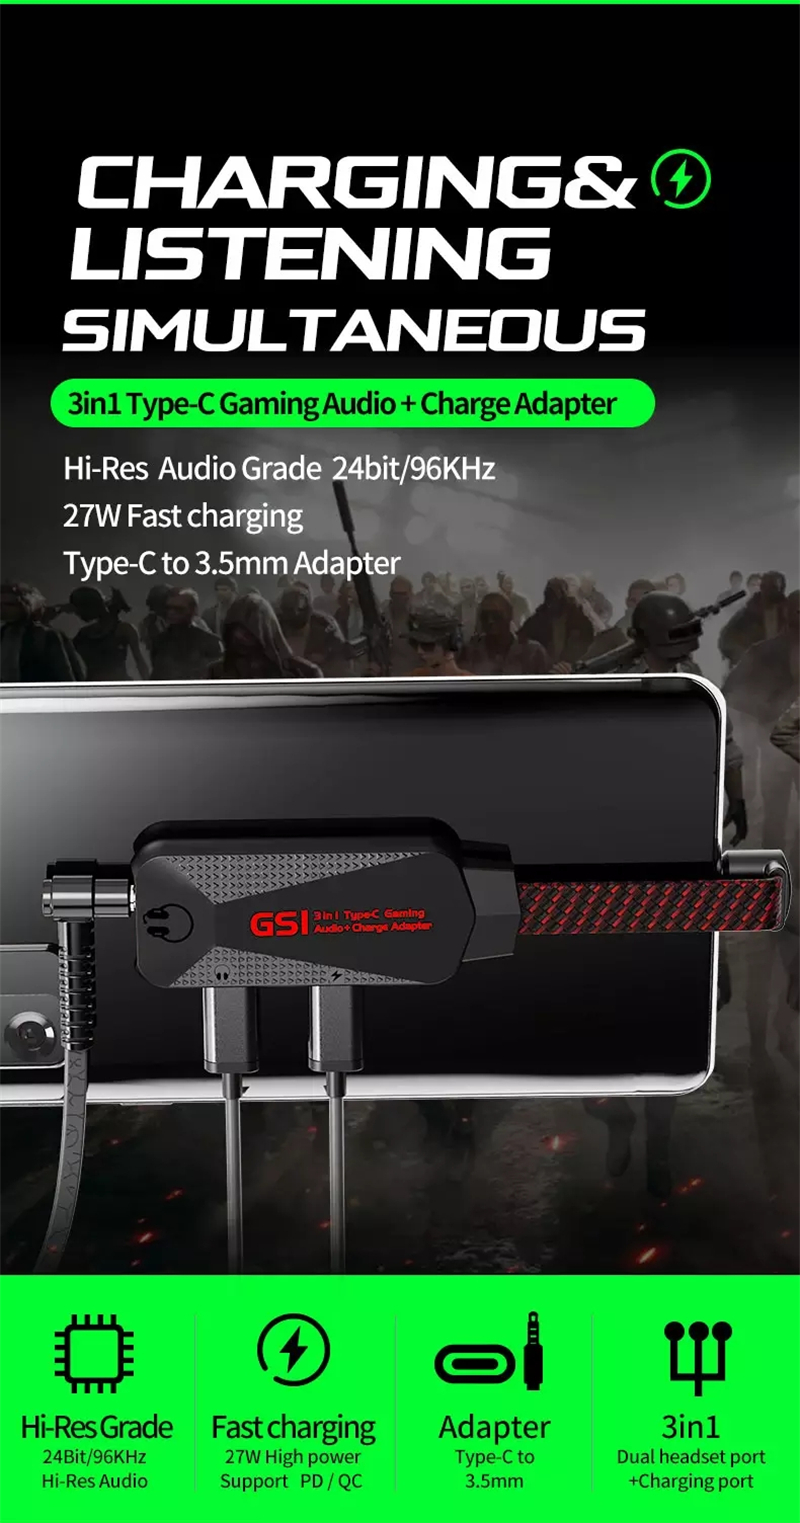 PLEXTONE-GS1-3-in-1-Sound-Card-Type-C-to-35mm-Adapter-27W-Fast-Charging-Hi-Res-Audio-Gaming-Mobile-P-1822370-1